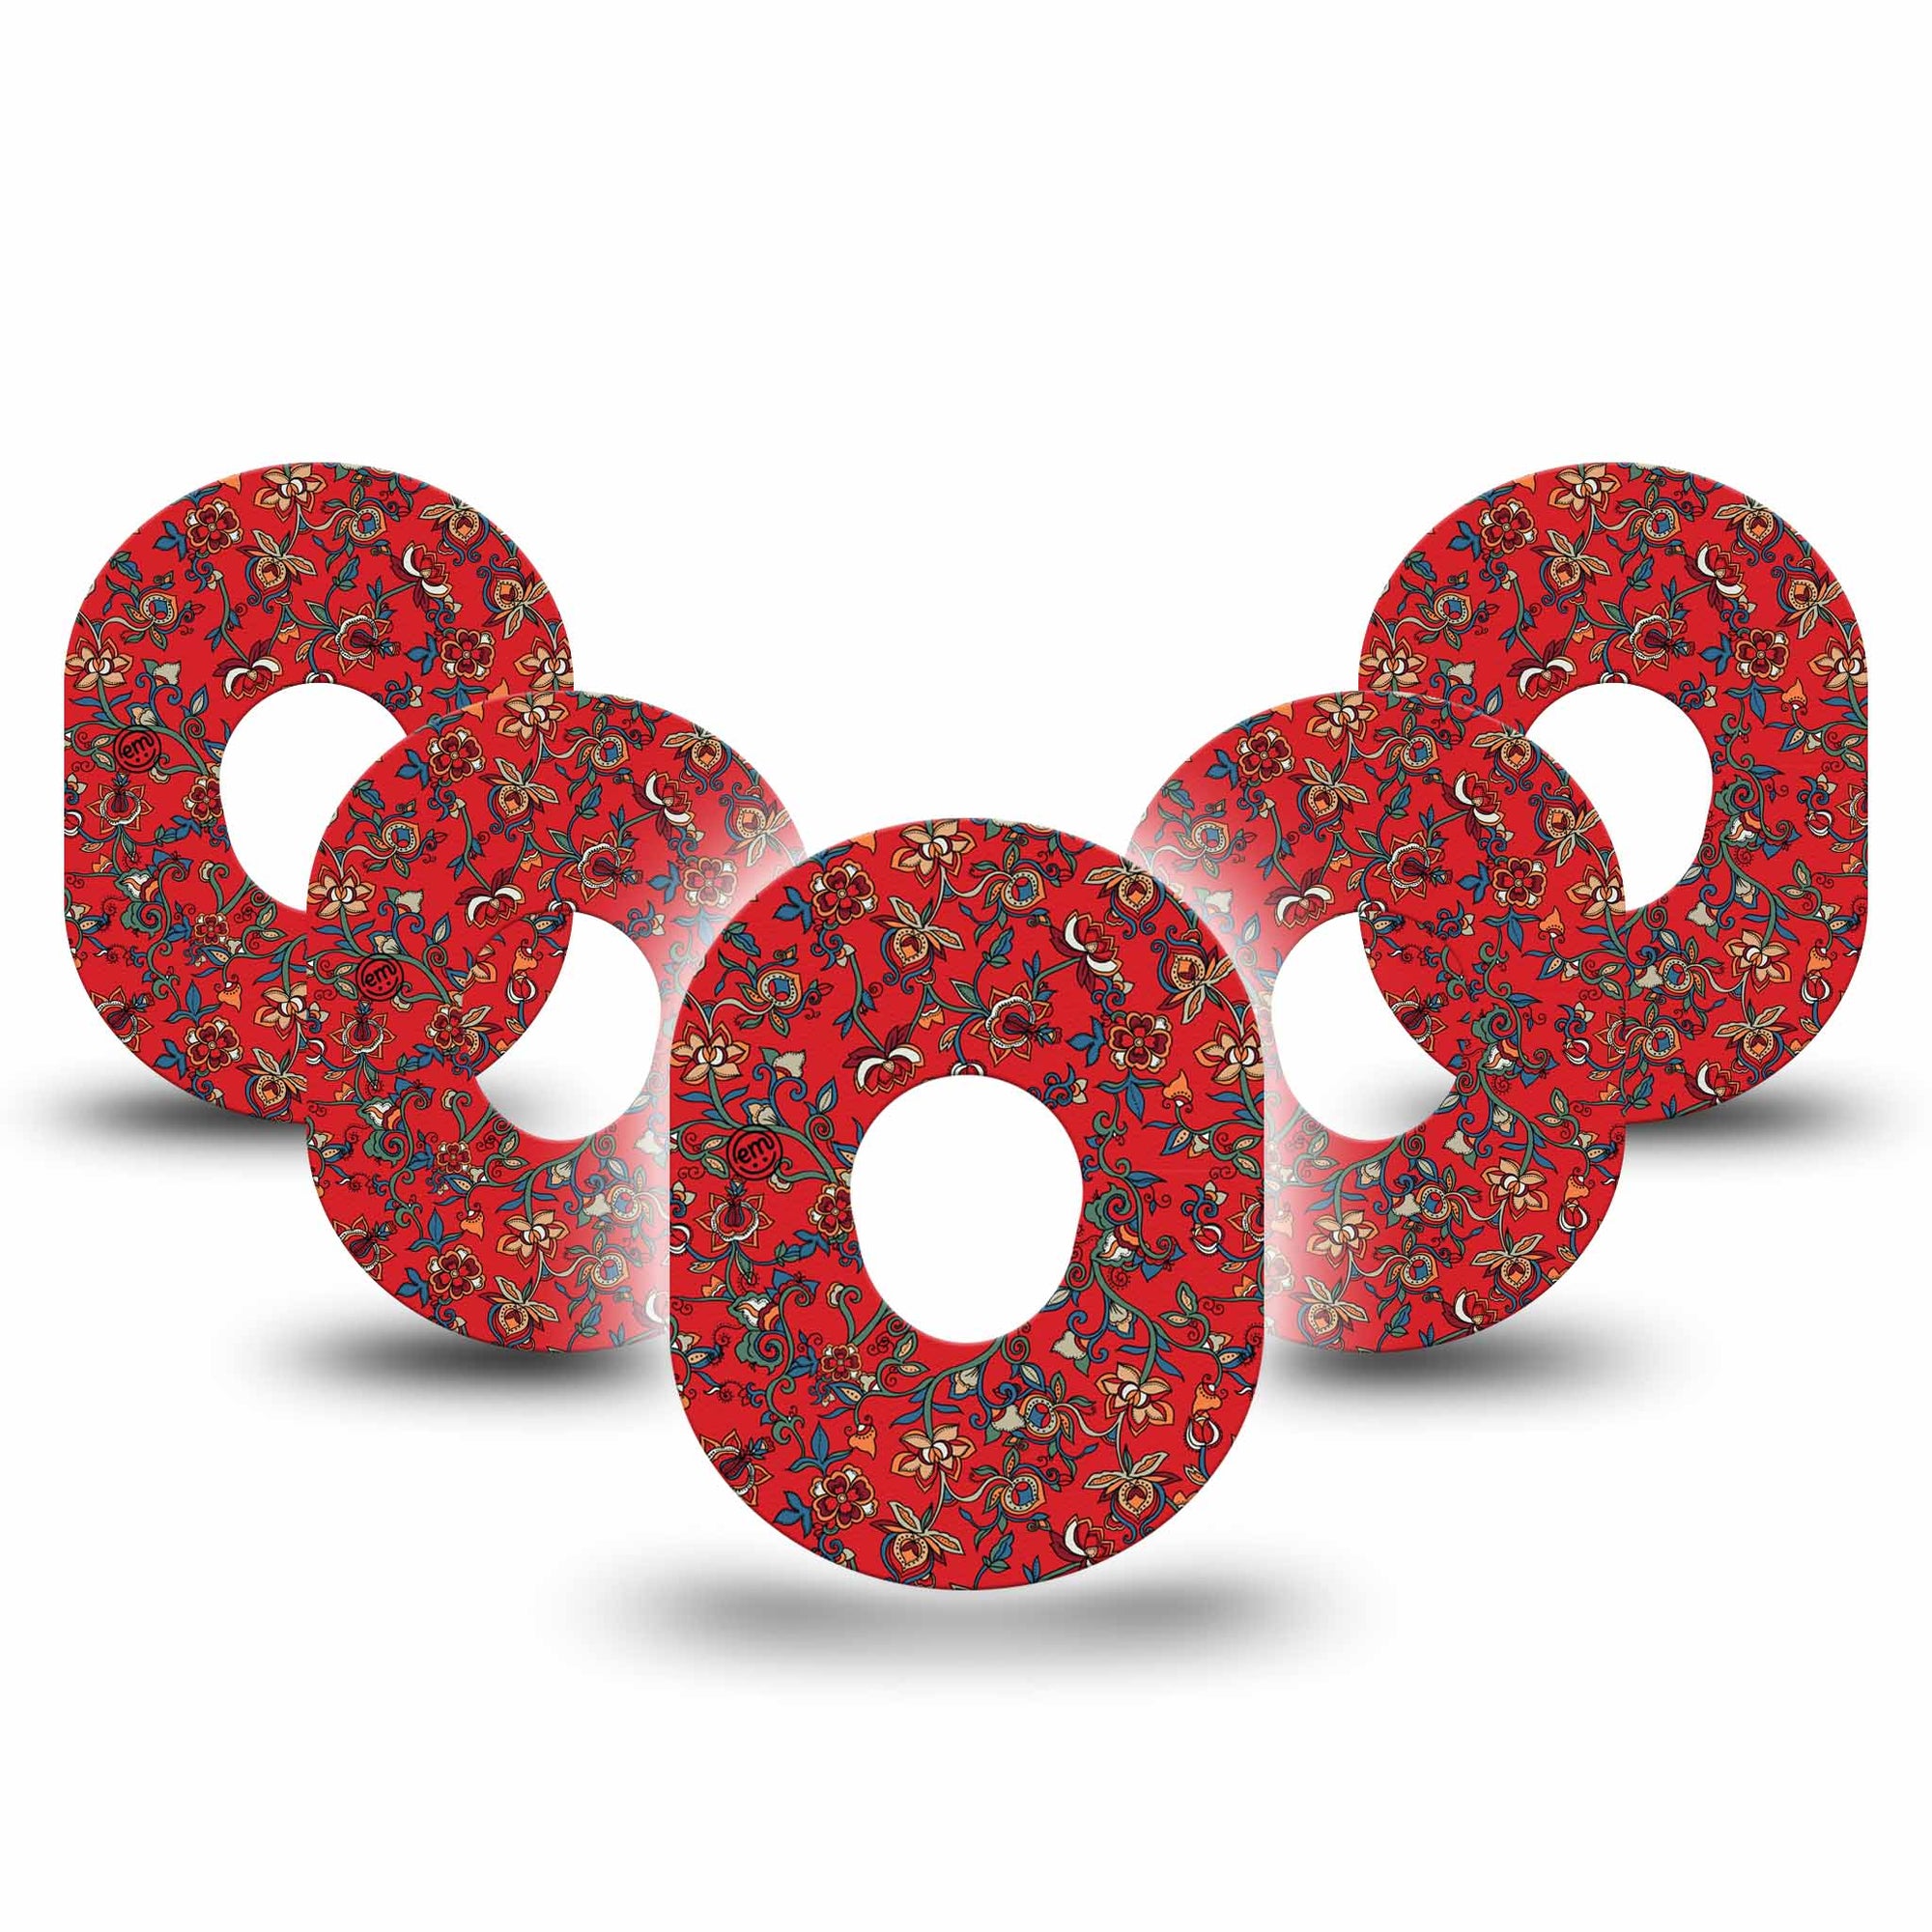 ExpressionMed Scarlett Boho Dexcom G7 Tape 5-Pack Red Blooms, CGM, Adhesive Tape Design